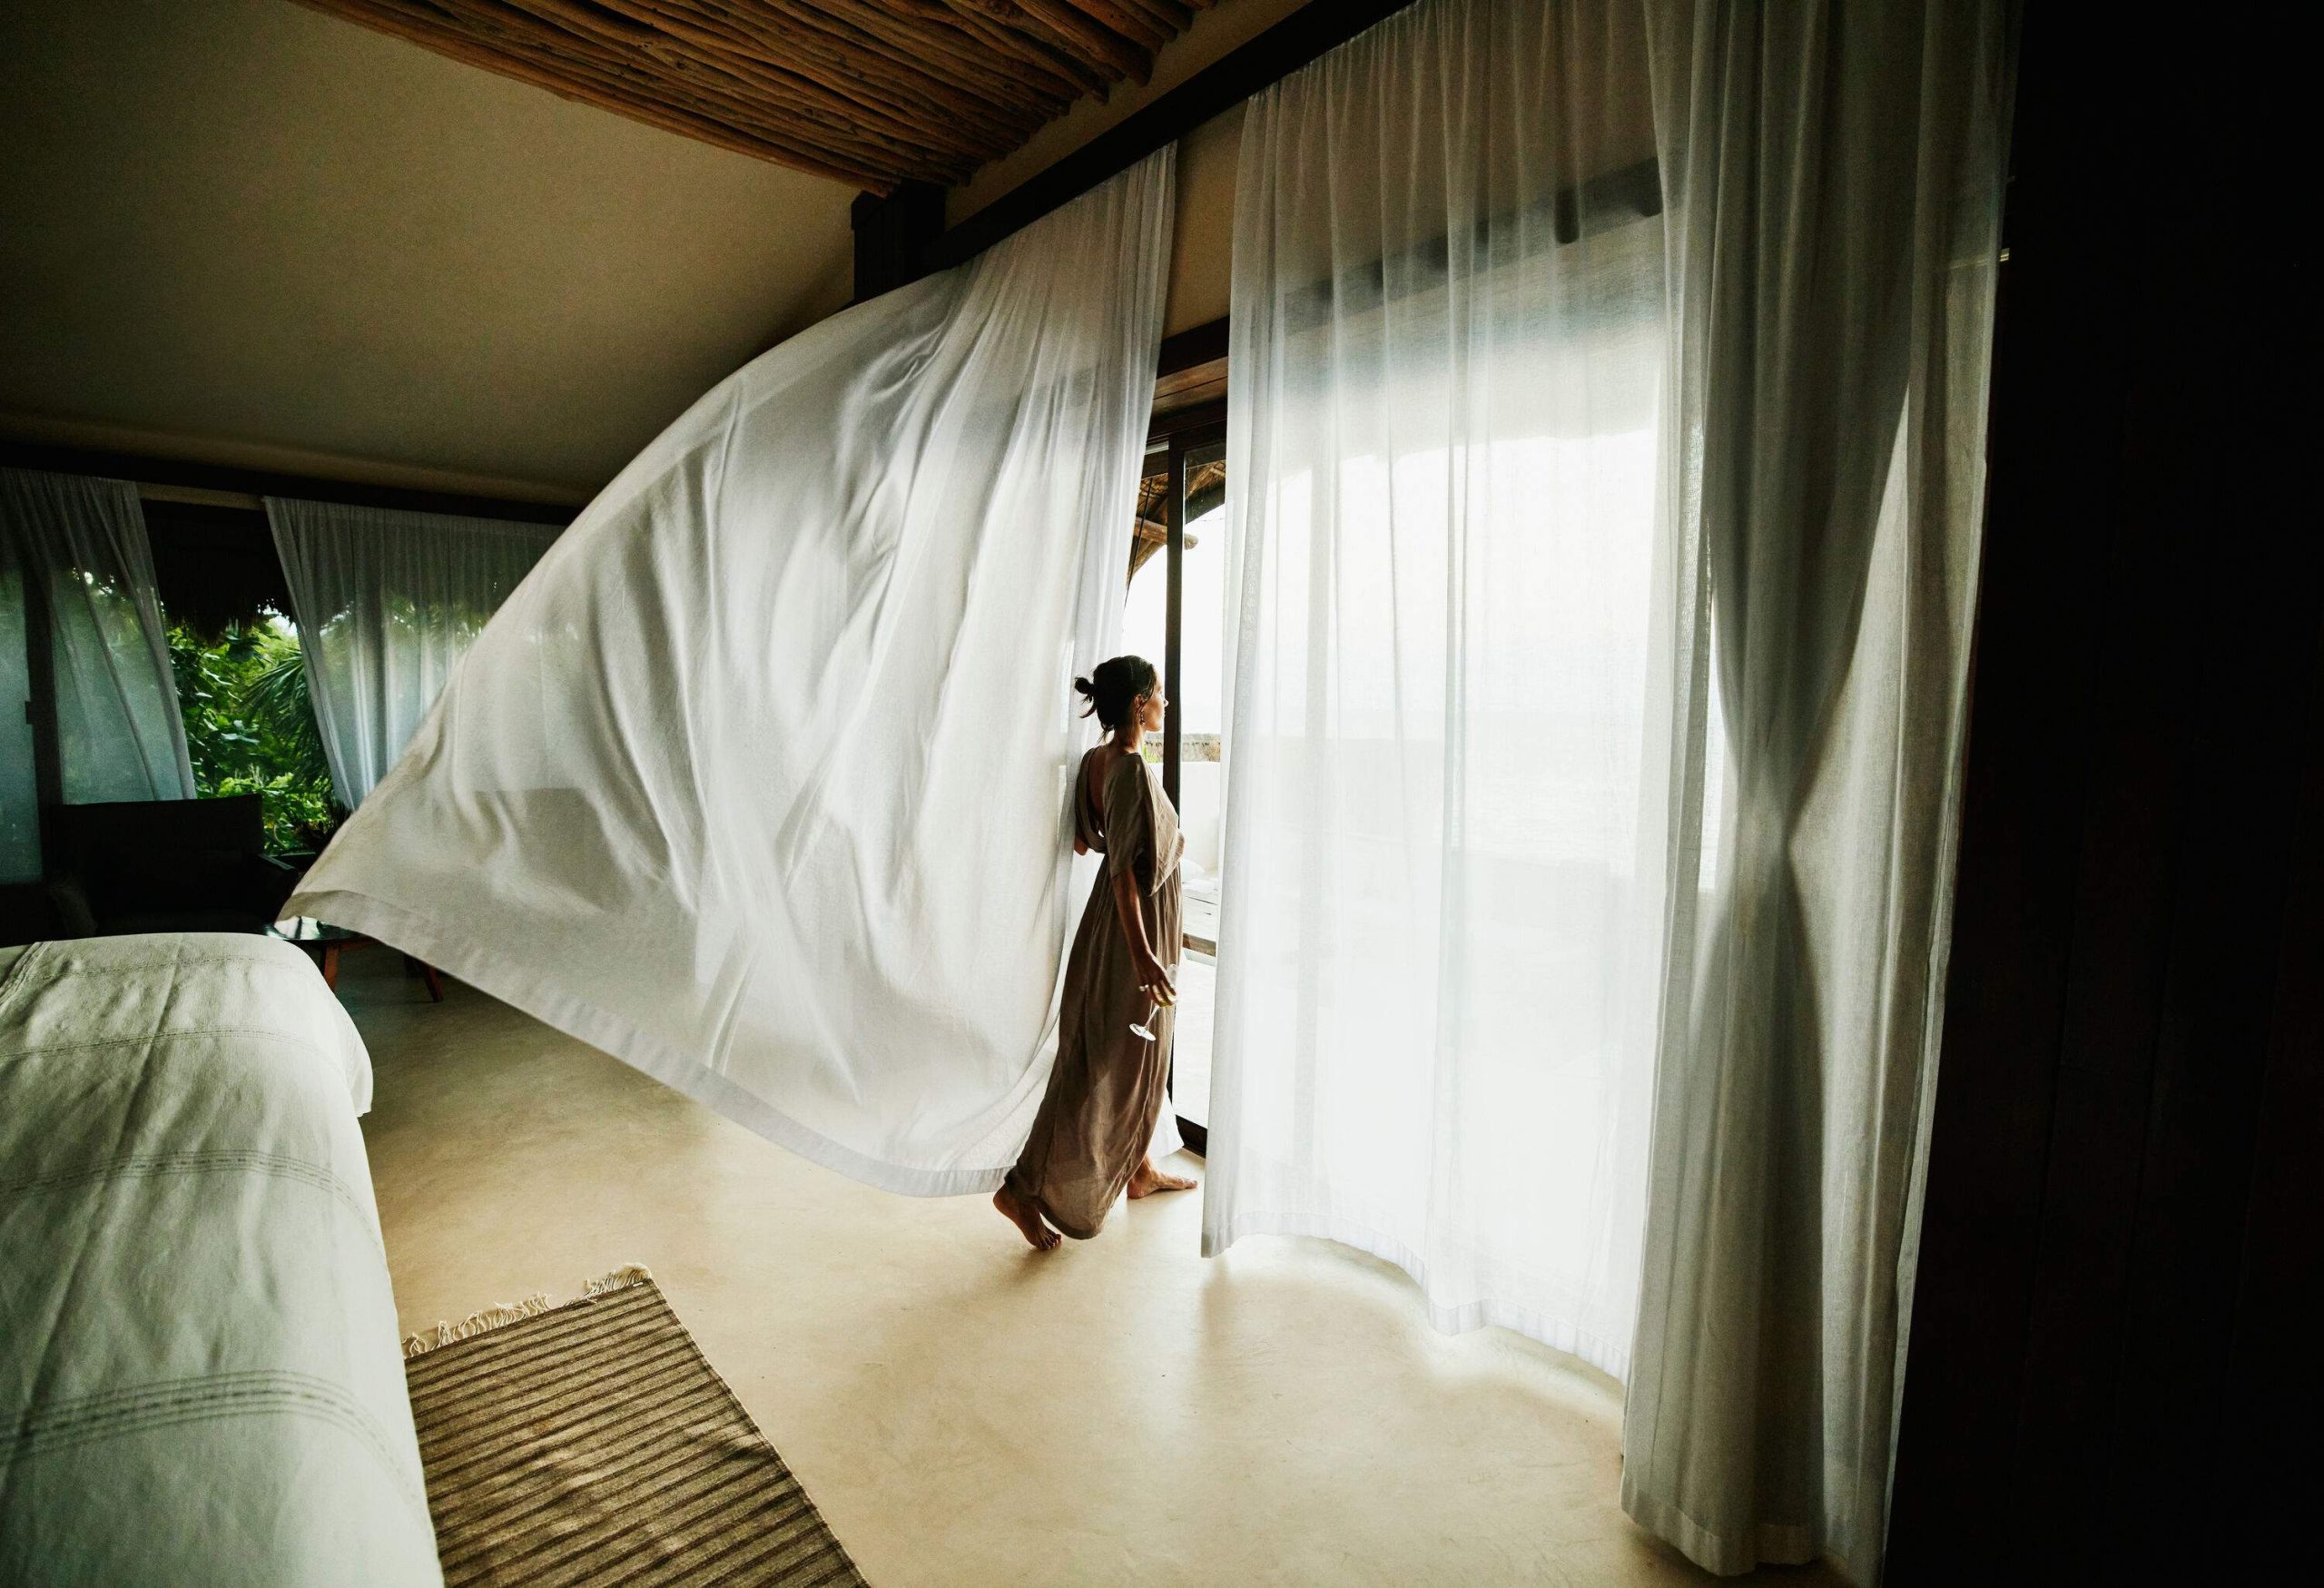 A woman stands beside a big window as the breeze flows through the curtains.